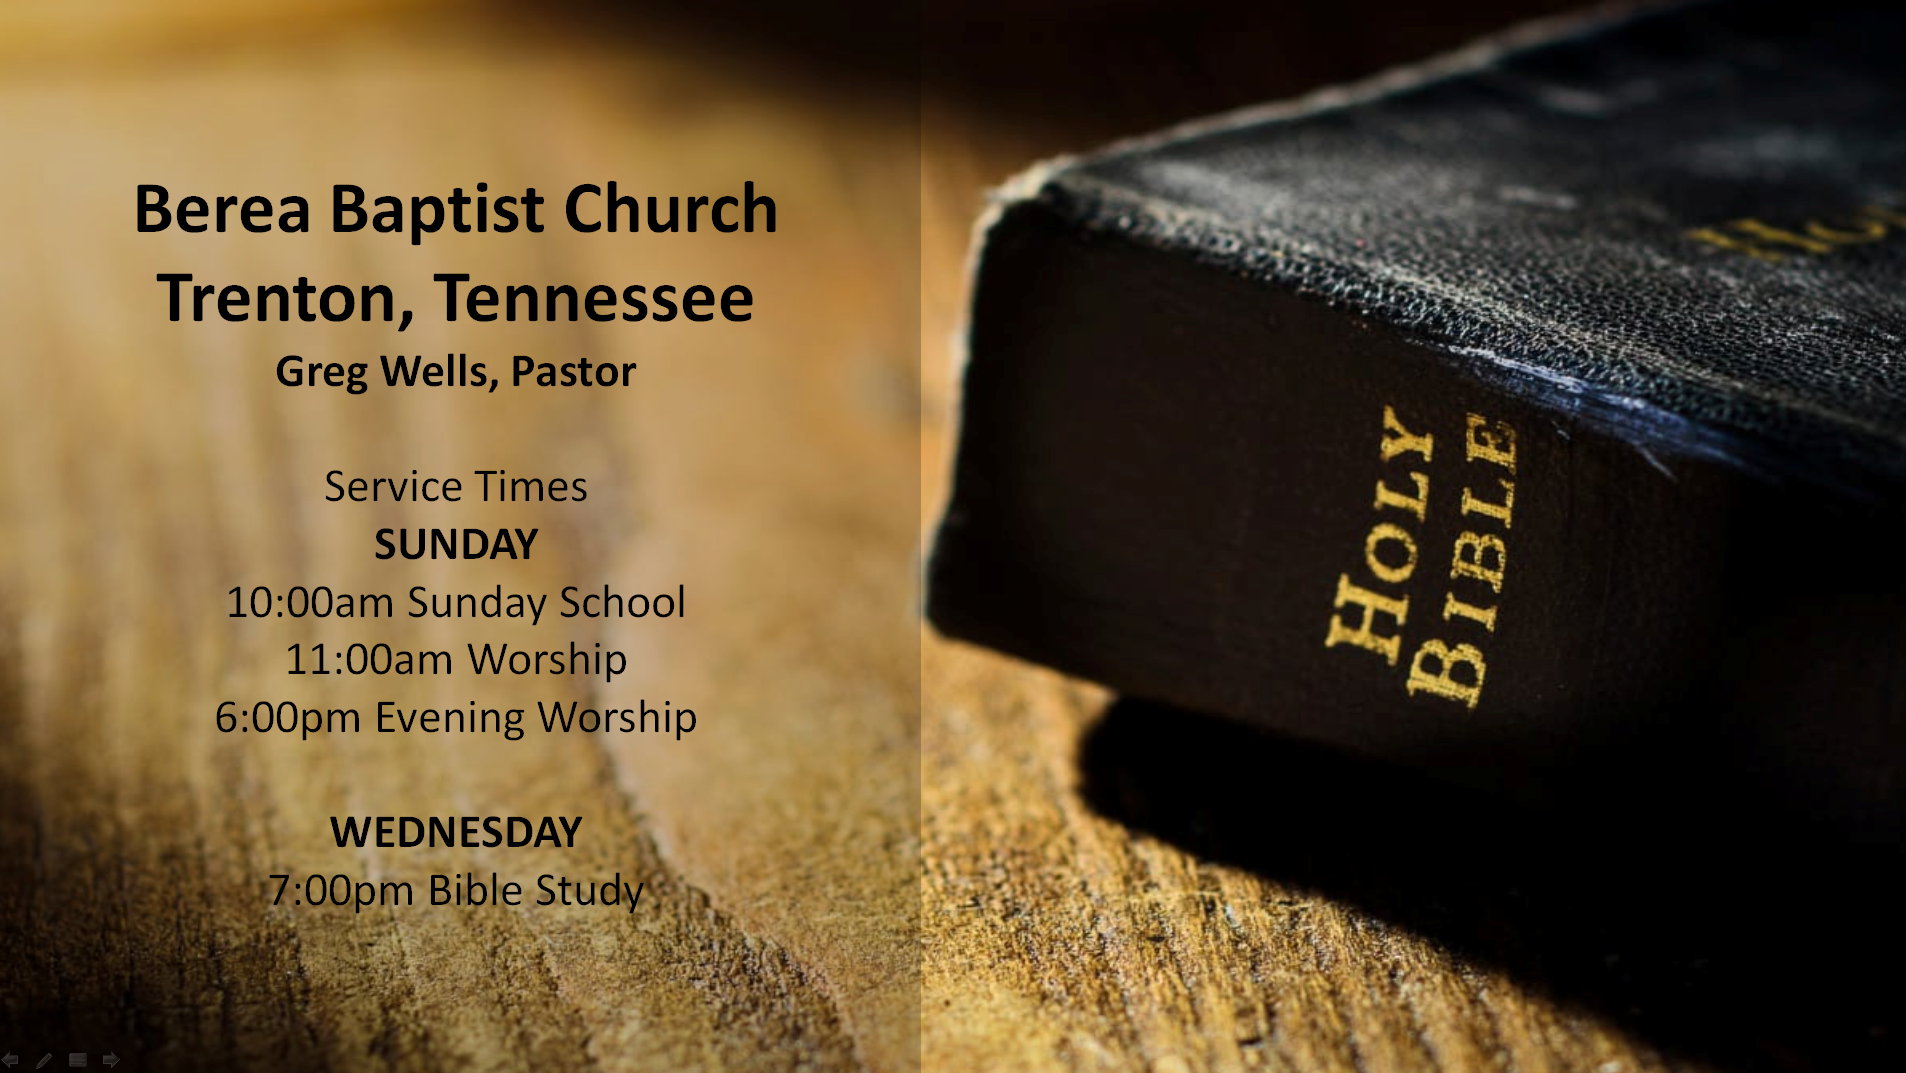 Sunday Night Worship Service - Preaching and teaching from the Word of God.